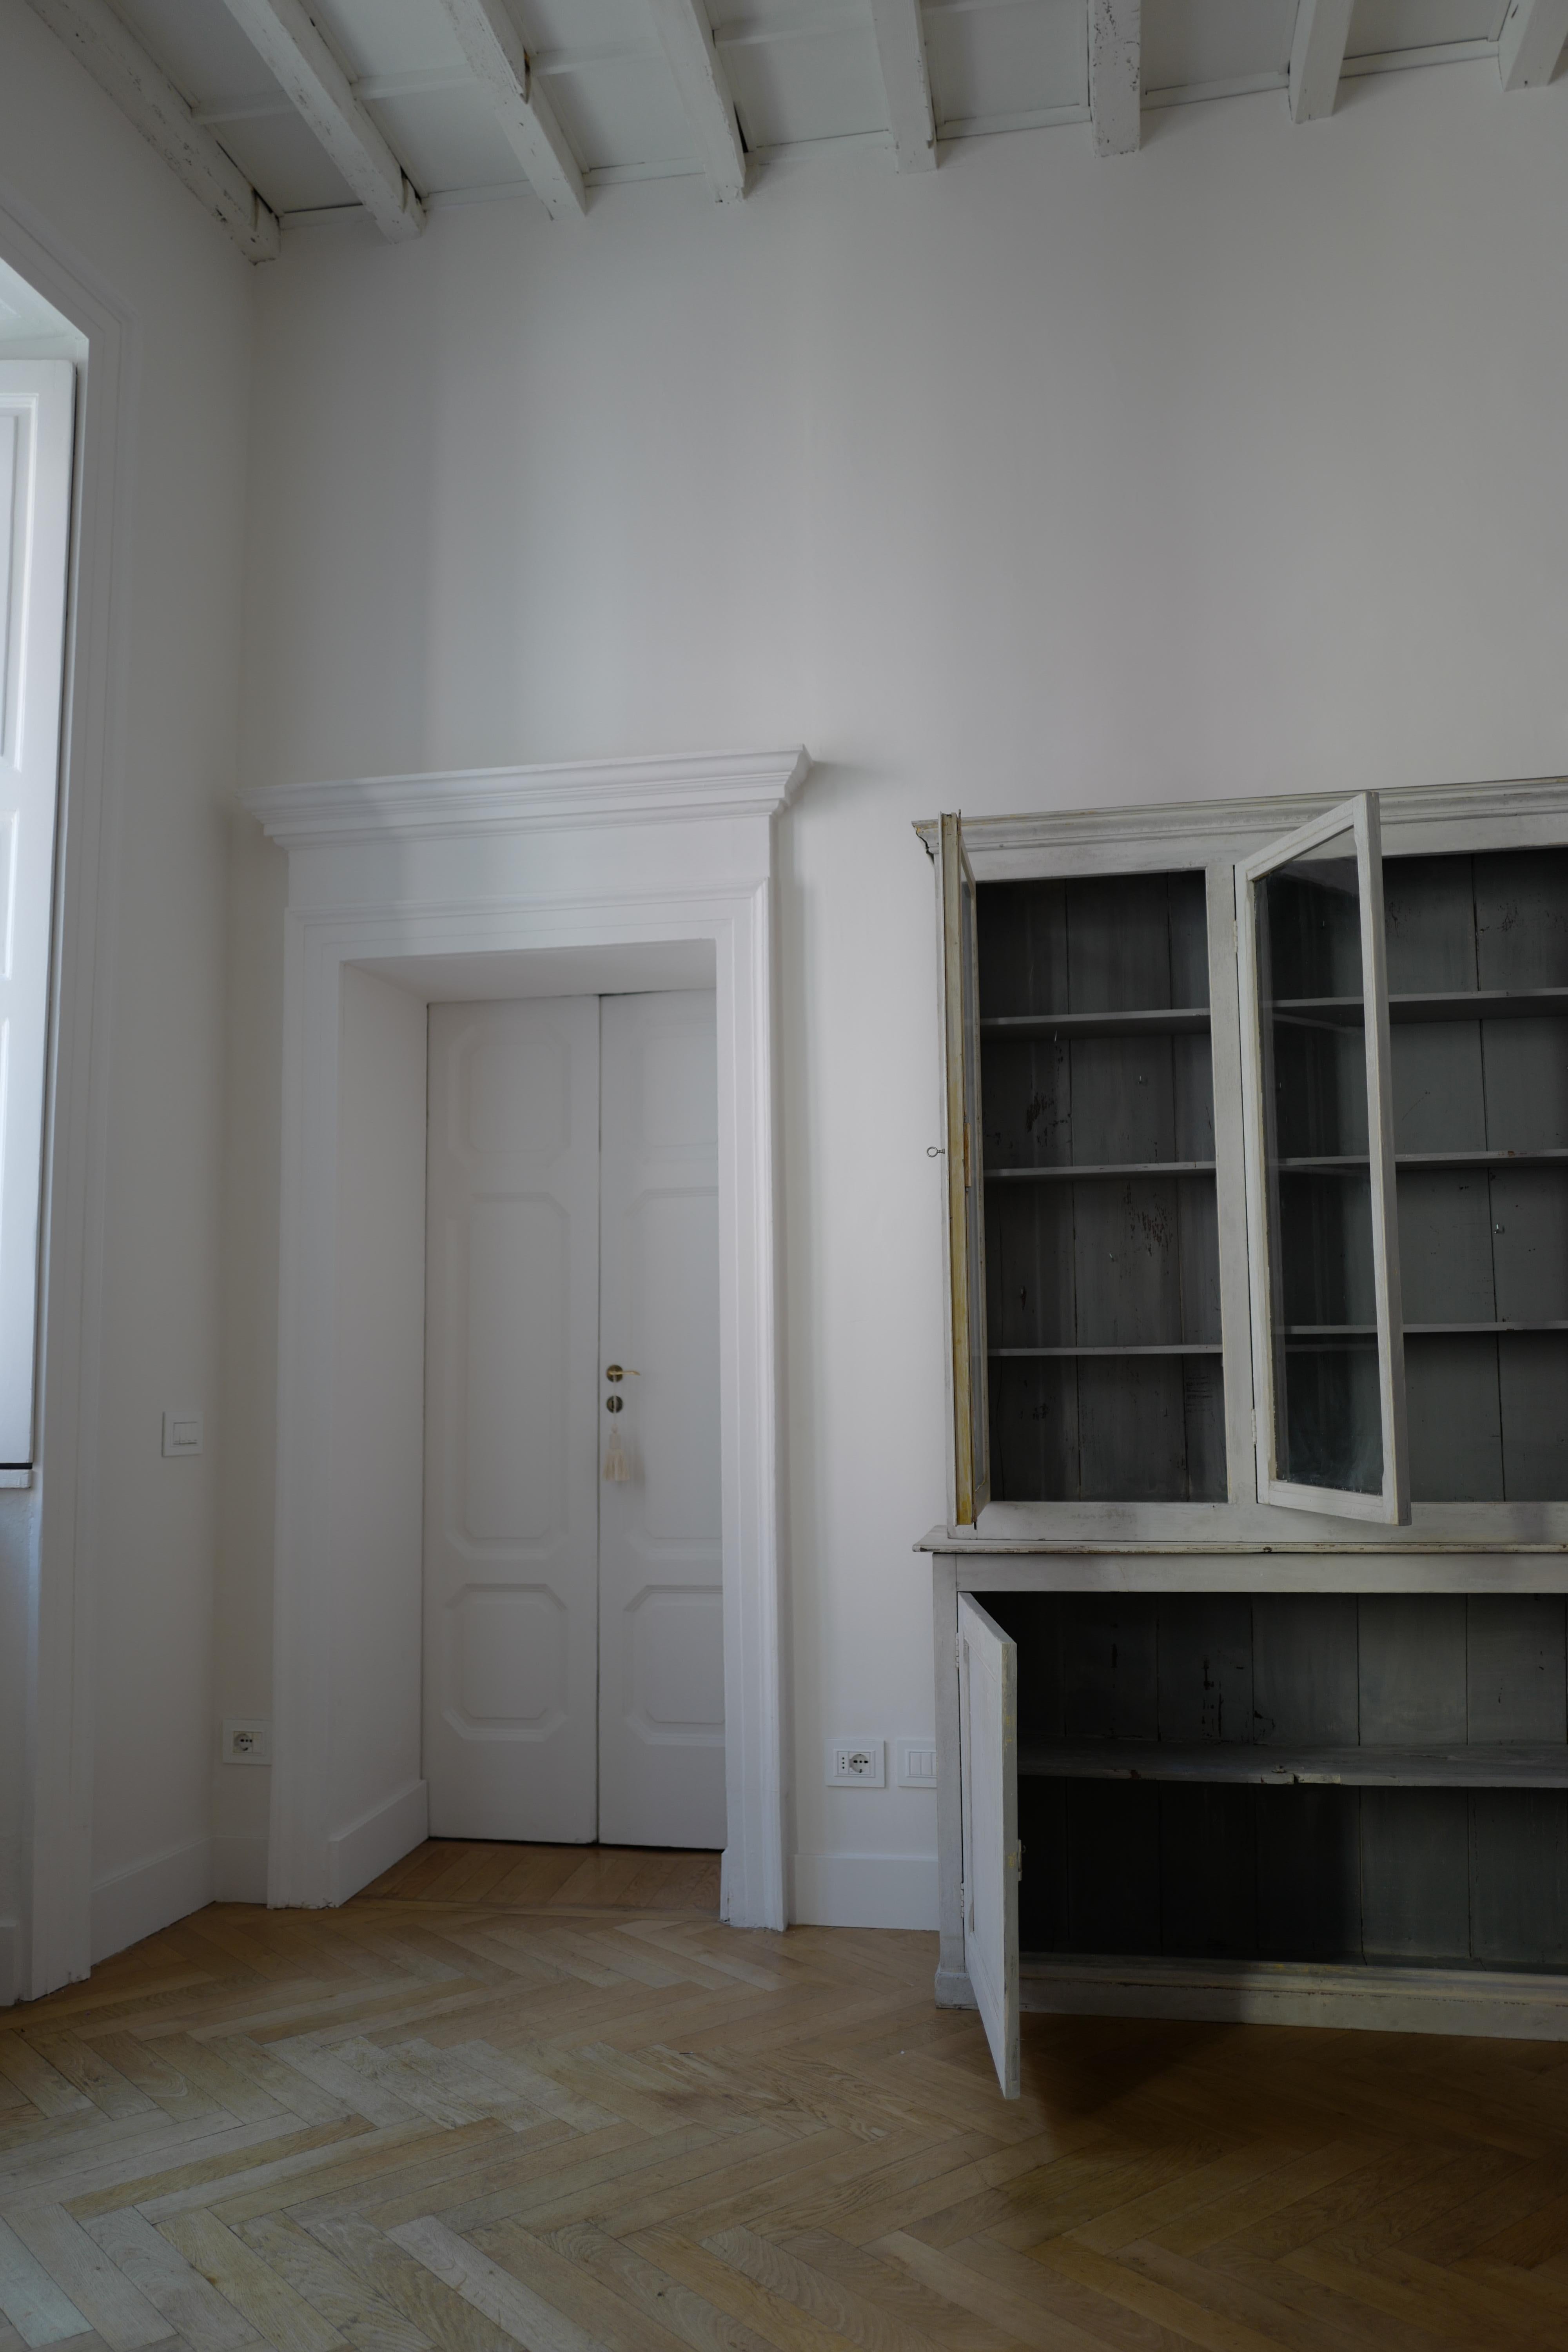 This French Provincial large display case is a statement in any space. Off white/grey painted oak exterior and a light blue/grey painted interior. Featuring original wavy glass in all but one door. The far left door's original glass broke during